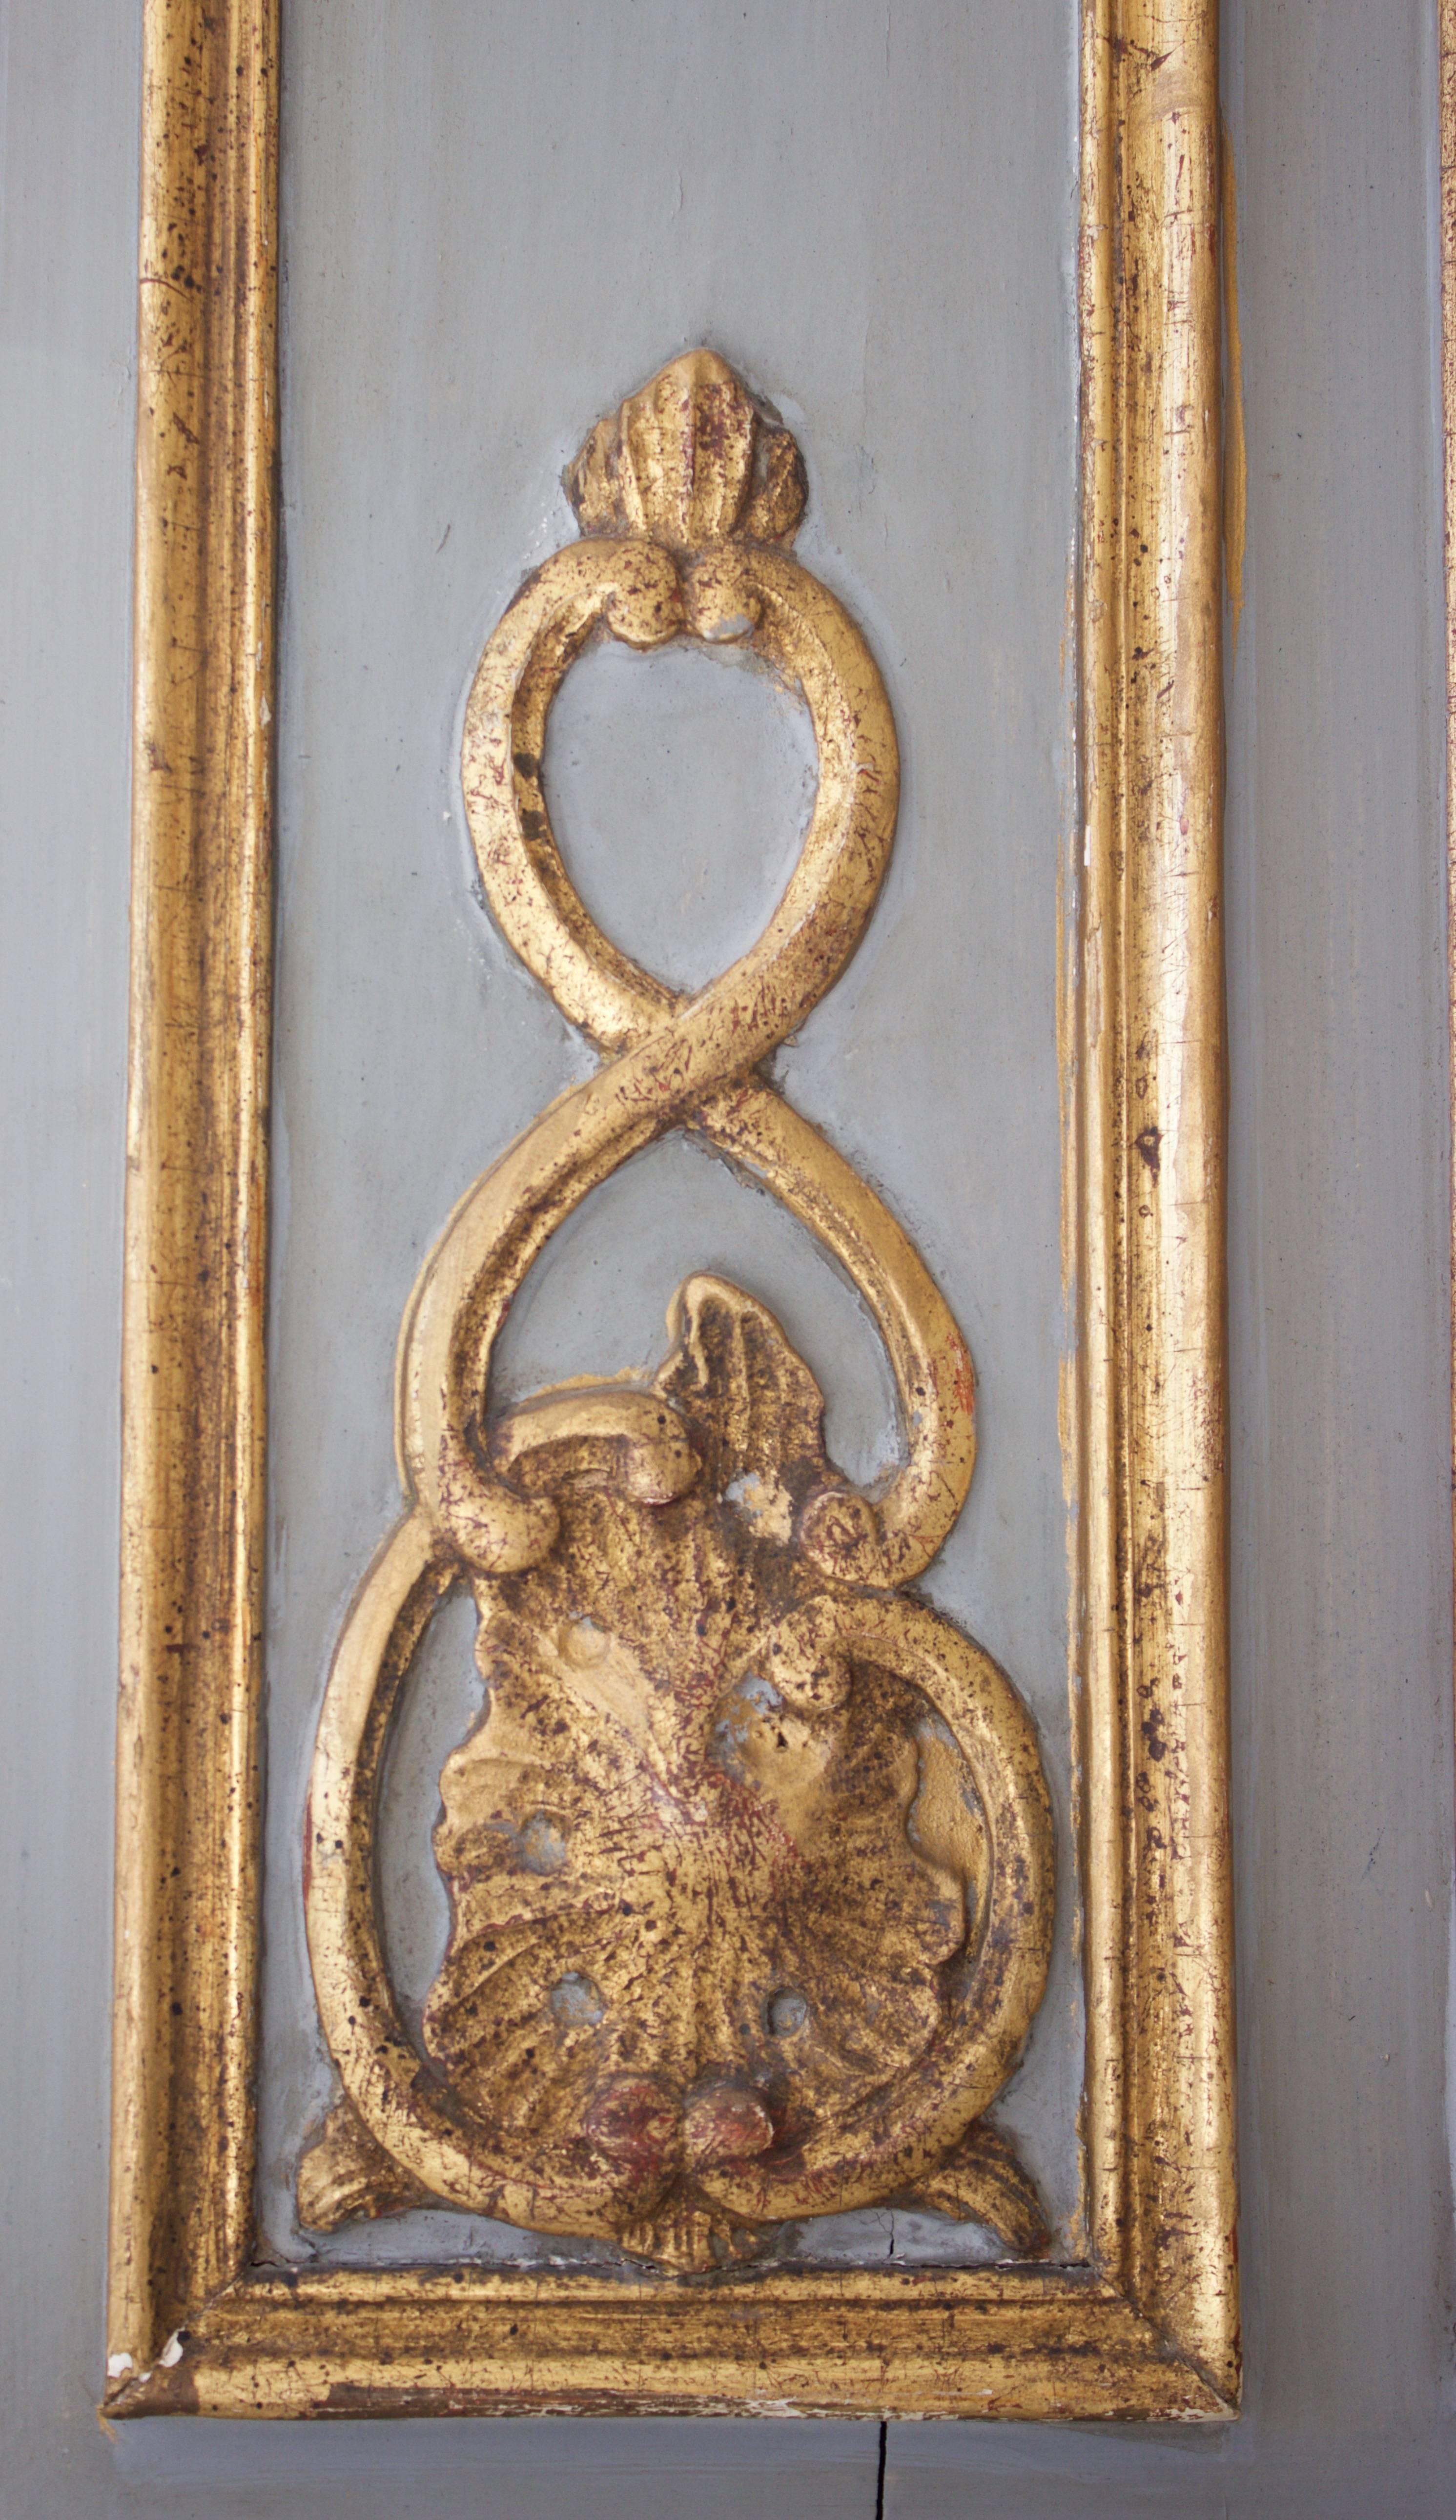 Antique mirror trumeau in a grey lacquered ground having fine carving and its original gilt gold on both frames. Typical of the Decorative French 